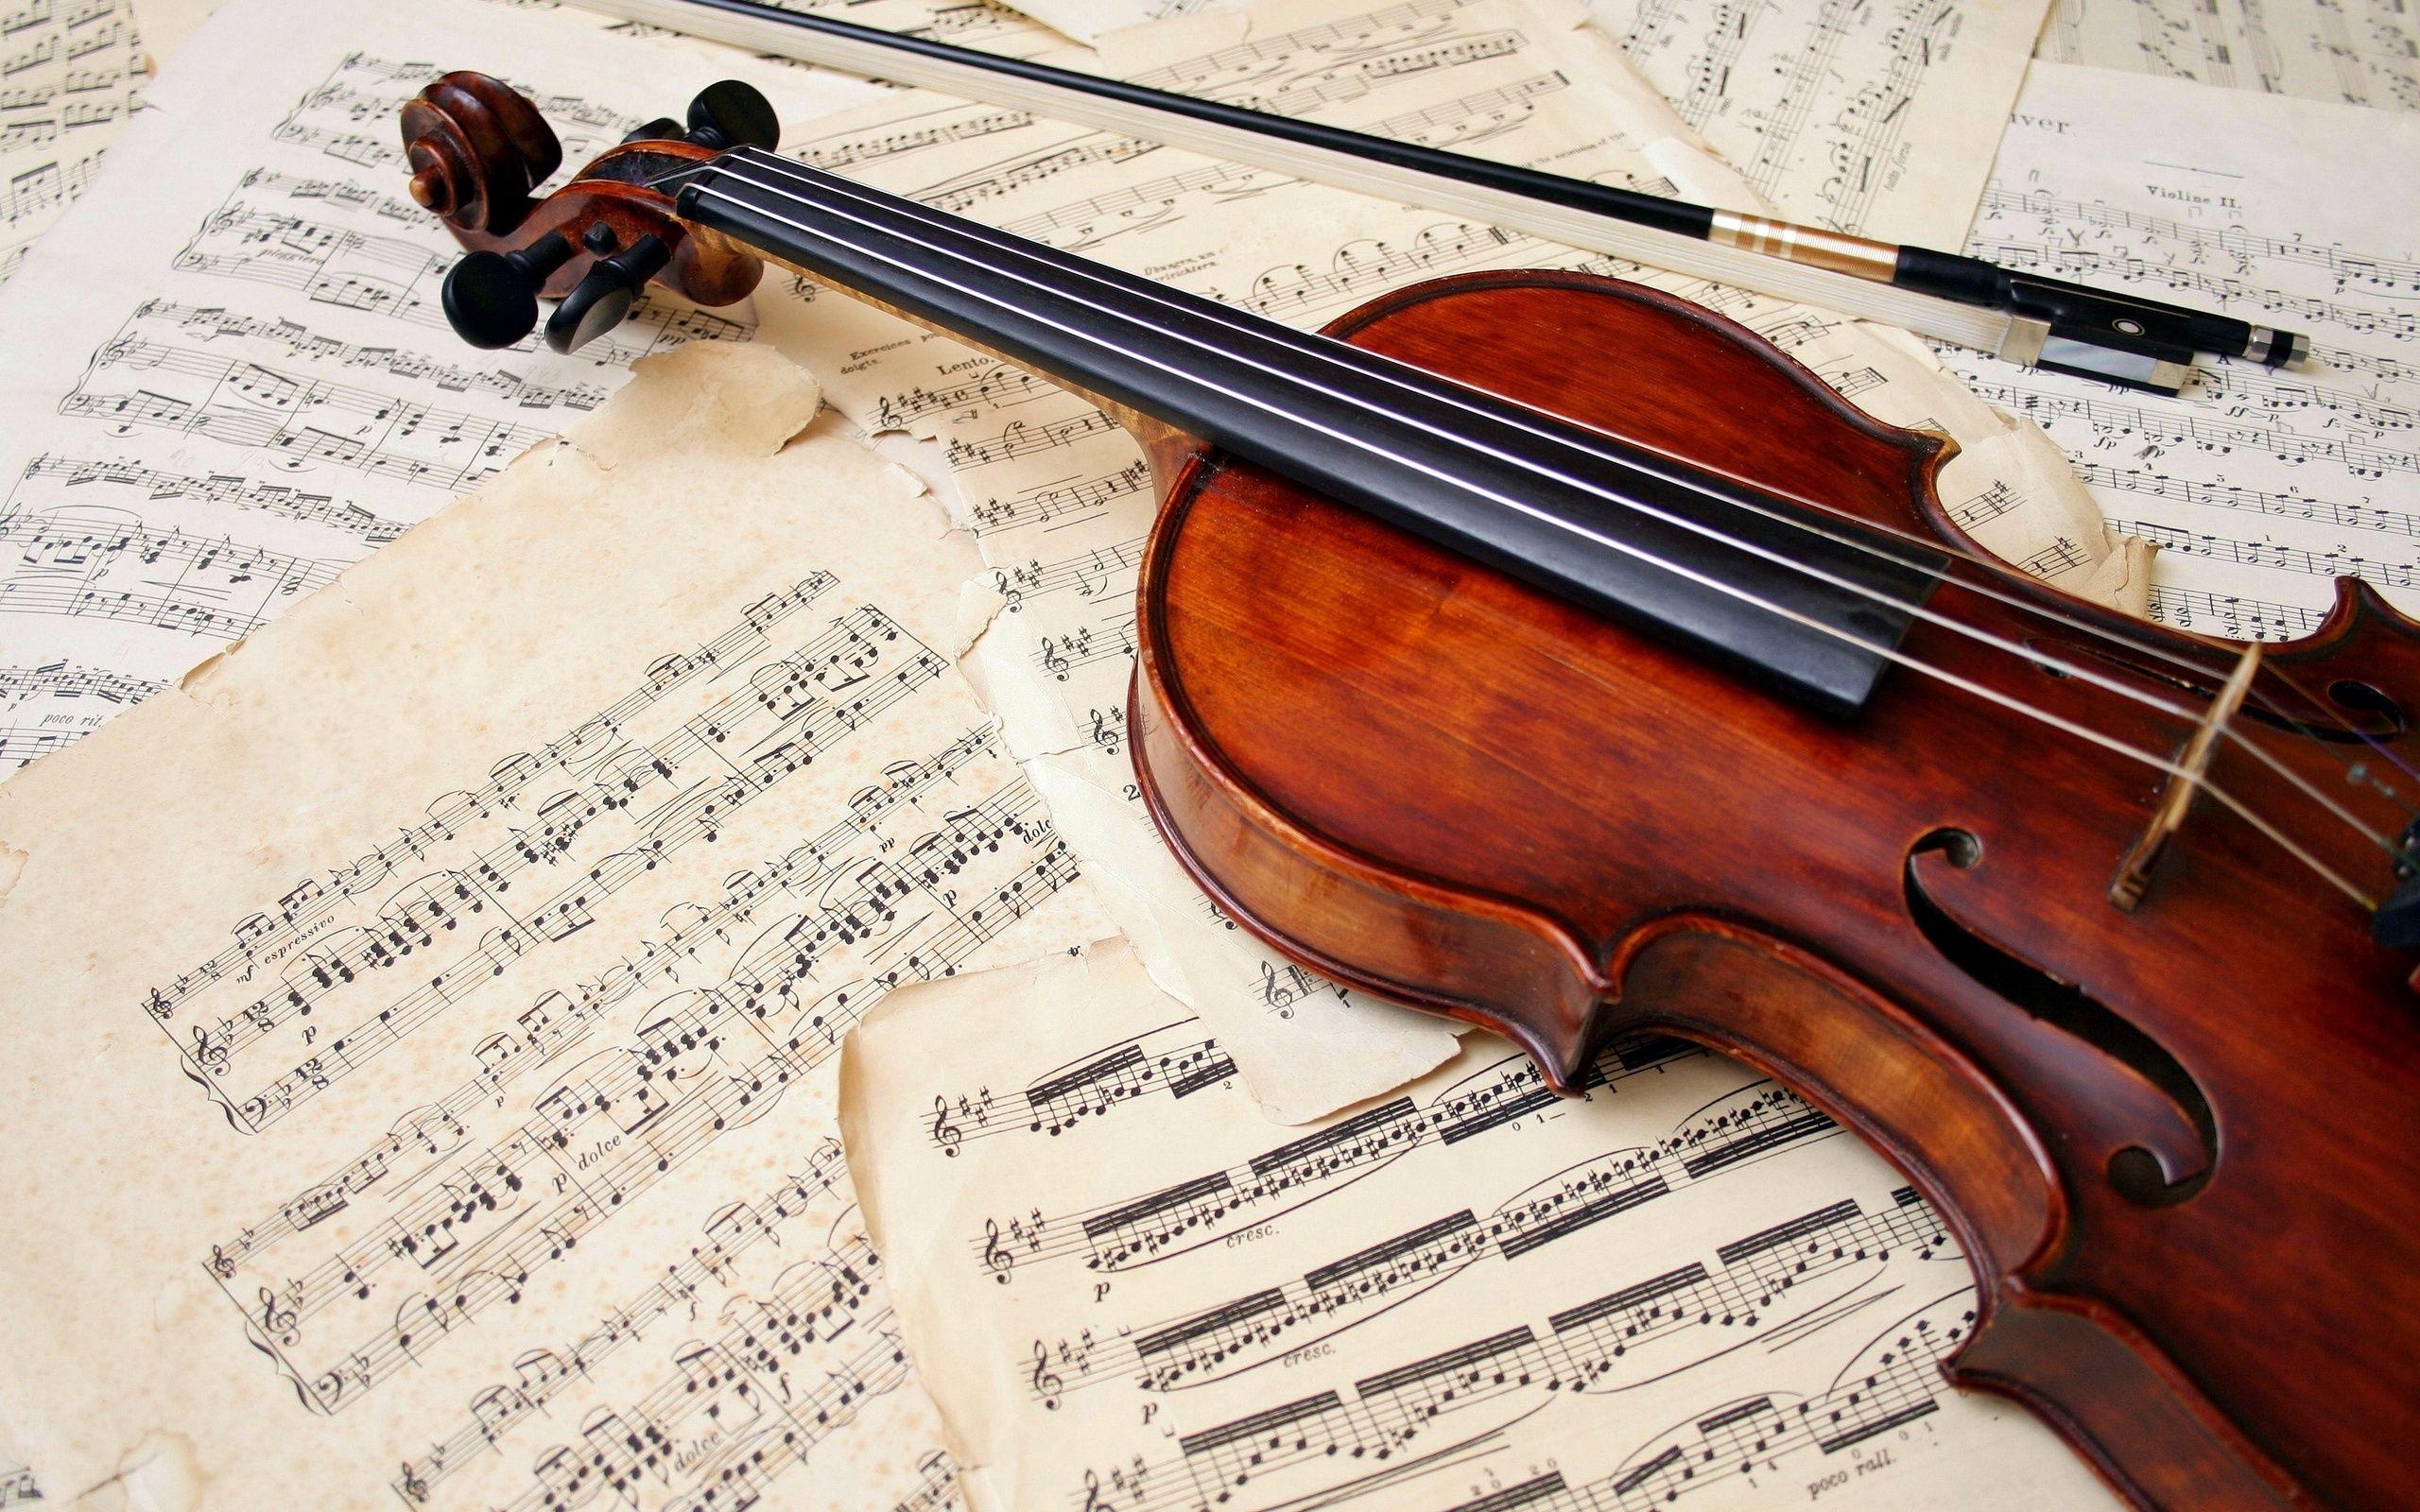 Viola: Two Arcuate Plates Fastened With A "Garland" Of Ribs, Violists' World Union, Notes, Music Text. 2560x1600 HD Wallpaper.